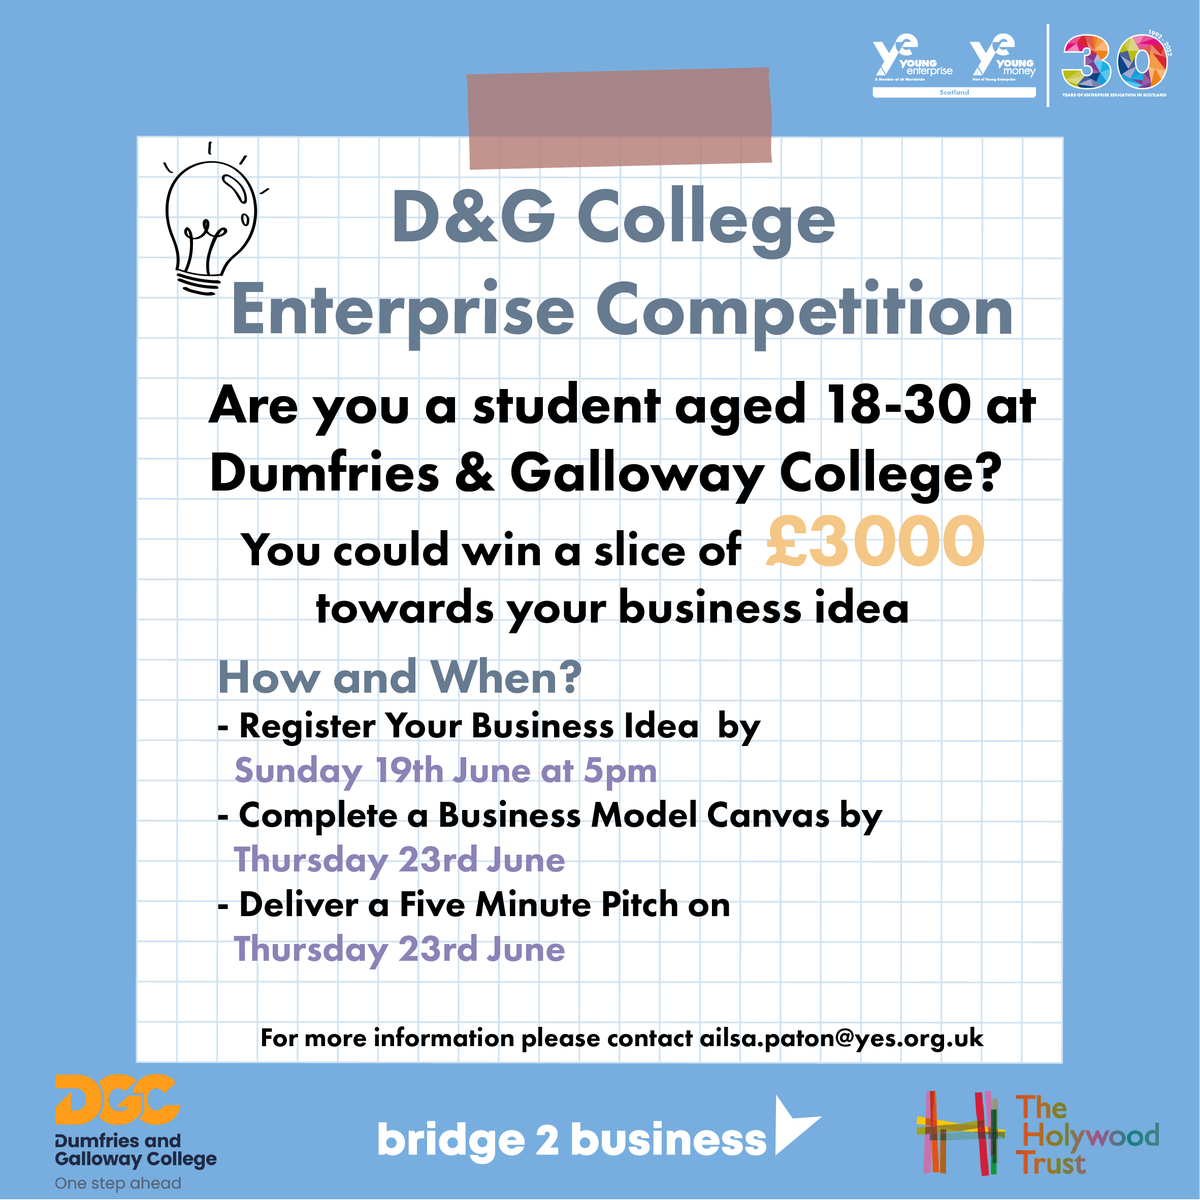 📢 Calling all students from Dumfries & Galloway College! 📢 Bridge 2 Business are running an Enterprise Competition with a funding pot of £3,000 sponsored by The Holywood Trust. Aged between 18-30 and have a business idea? Register your idea today: forms.office.com/r/734PEQkijA